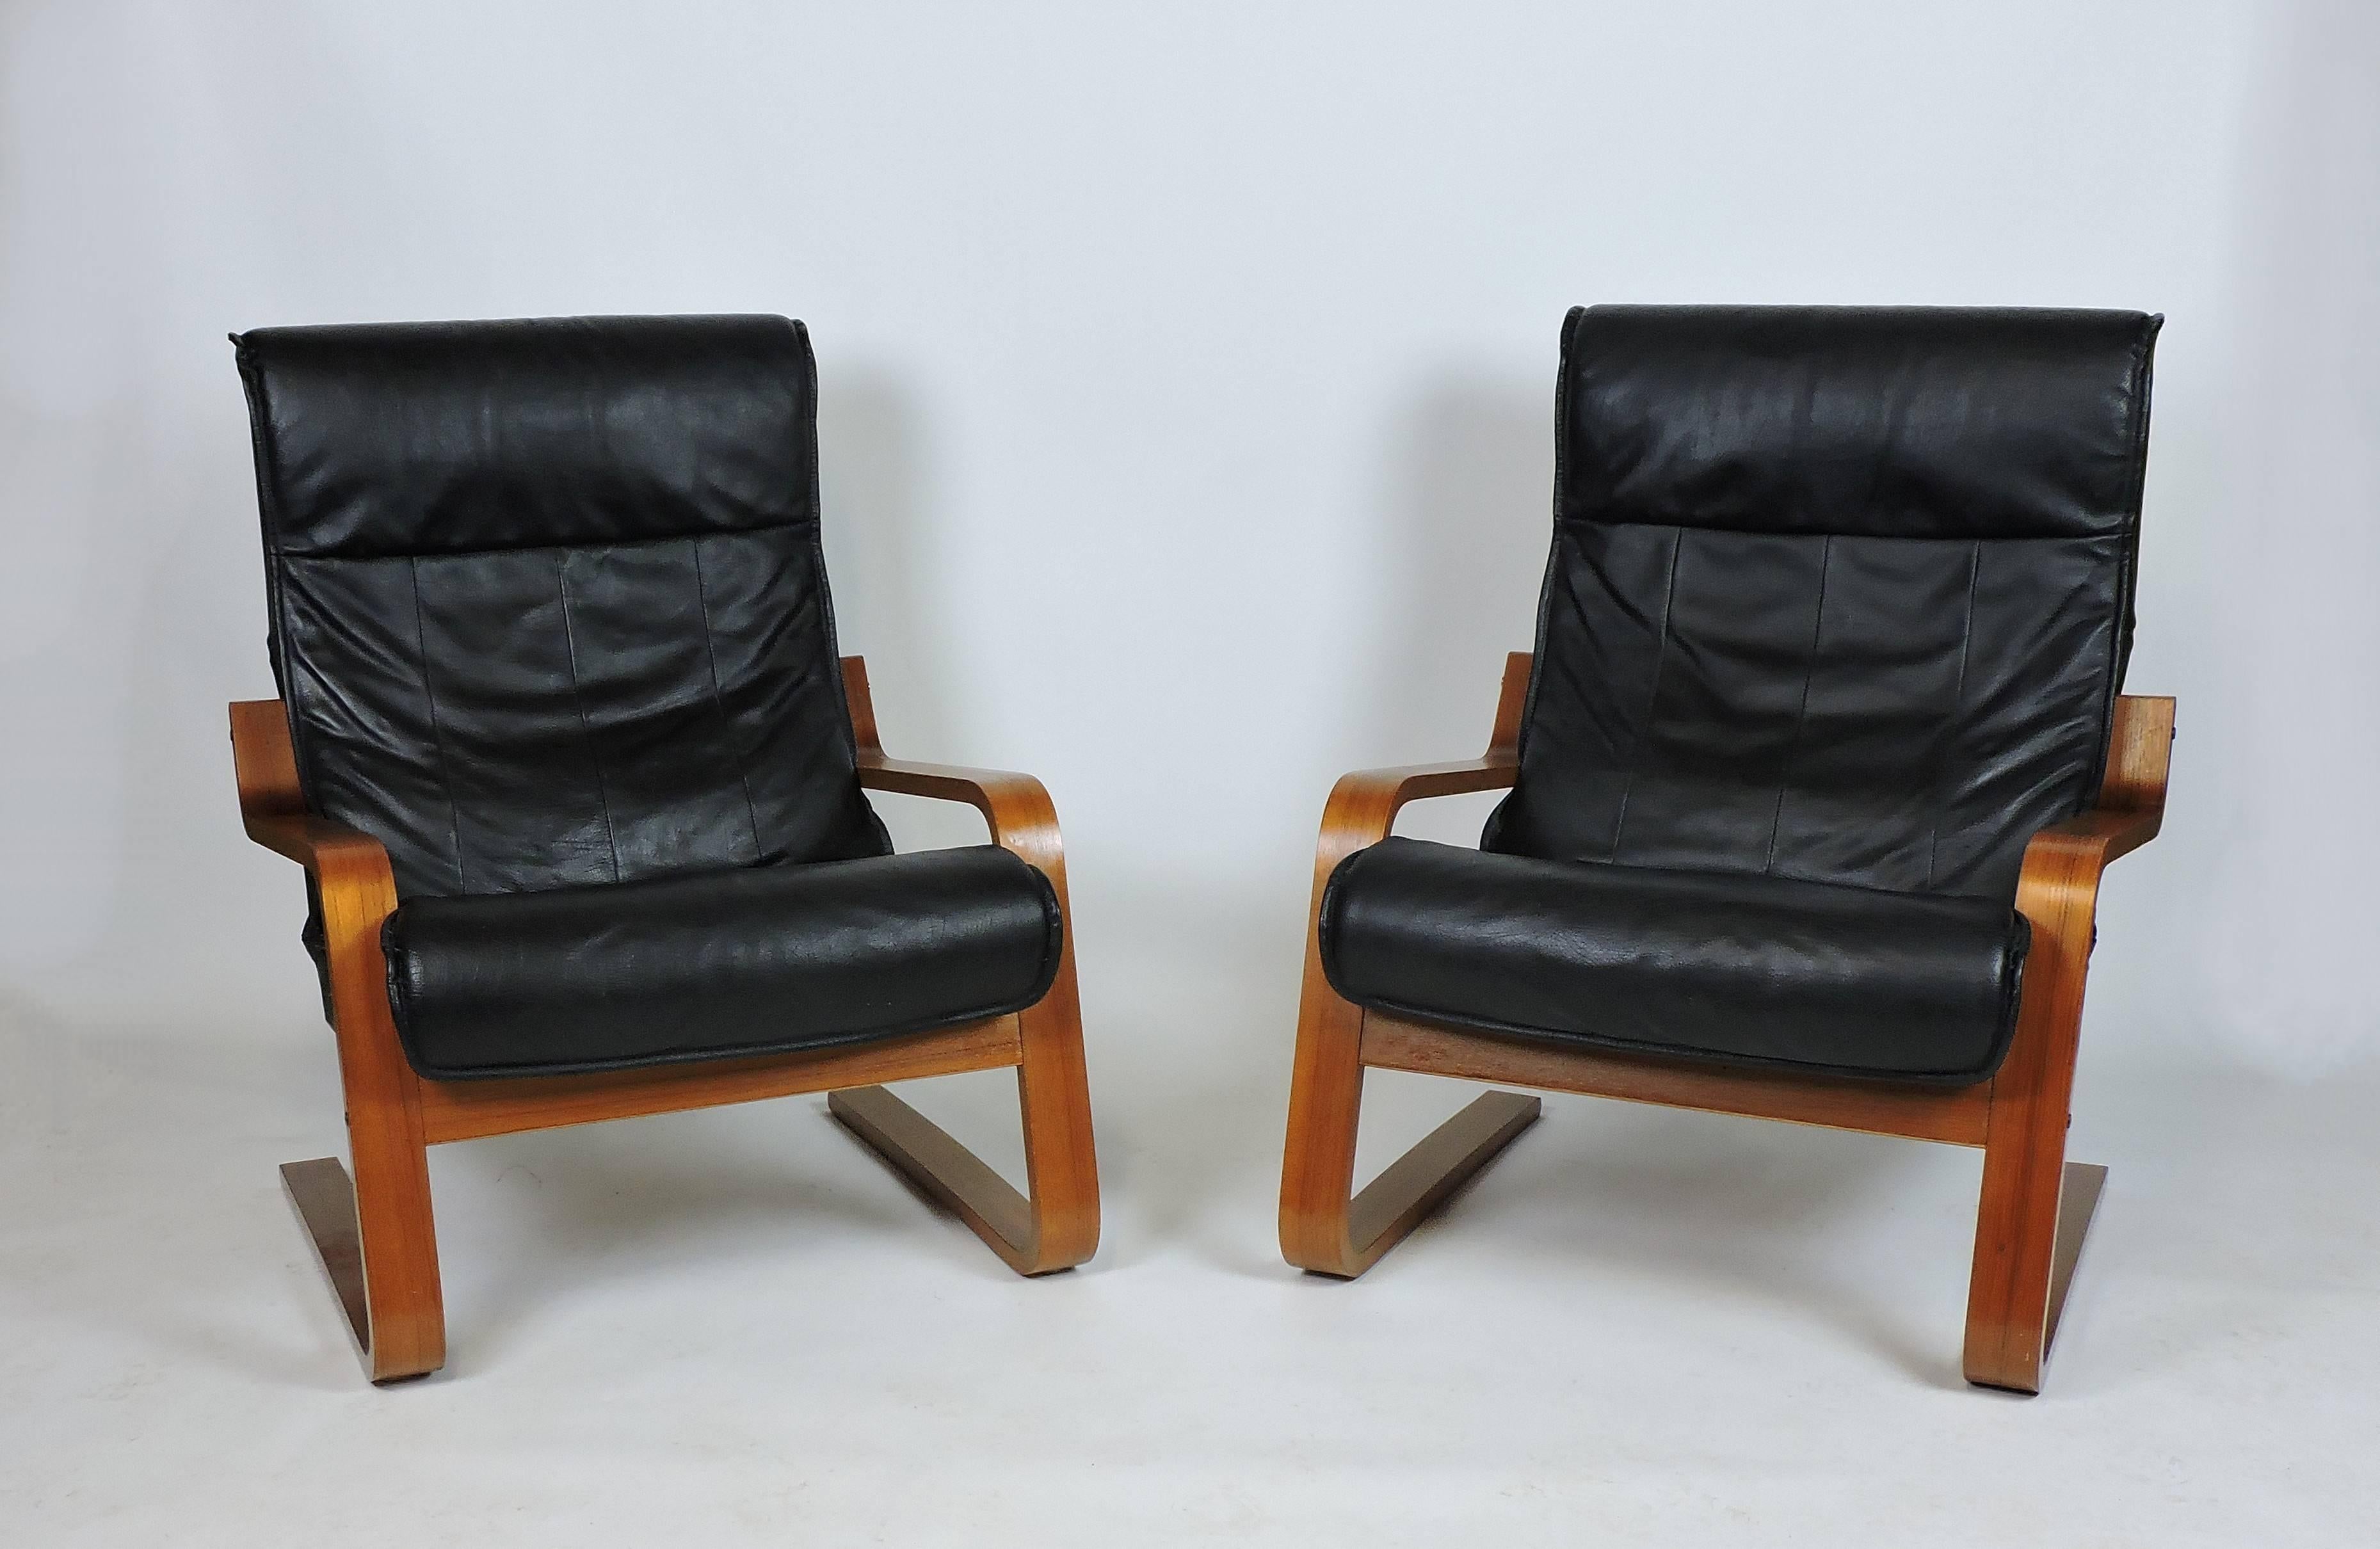 Super comfortable and handsome pair of teak lounge chairs made in Denmark by Kebe Mobelfabrik. These well made chairs have a bentwood cantilevered frame with black leather upholstery. Labelled with Kebe, Made in Denmark, label.